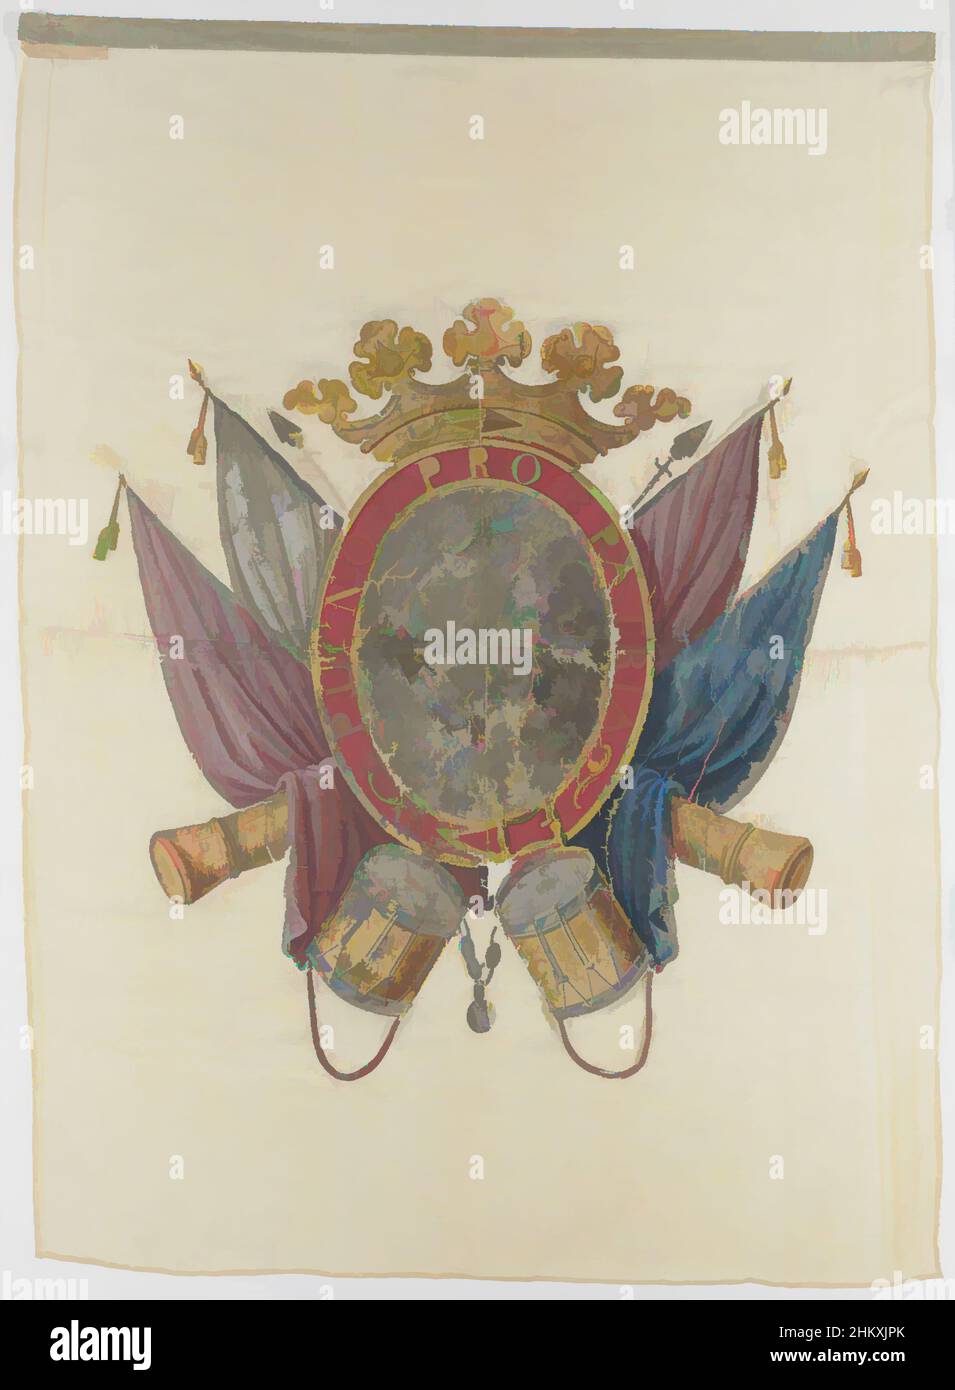 Art inspired by Banner of the regiment of Dutch Guards on foot, Ecru, on the center the full coat of arms of Orange-Nassau, as wielded by William IV and William V, surrounded by the Order of the Garter, covered by a king's crown. The whole is placed on a trophy of cannons, bows, lances, Classic works modernized by Artotop with a splash of modernity. Shapes, color and value, eye-catching visual impact on art. Emotions through freedom of artworks in a contemporary way. A timeless message pursuing a wildly creative new direction. Artists turning to the digital medium and creating the Artotop NFT Stock Photo